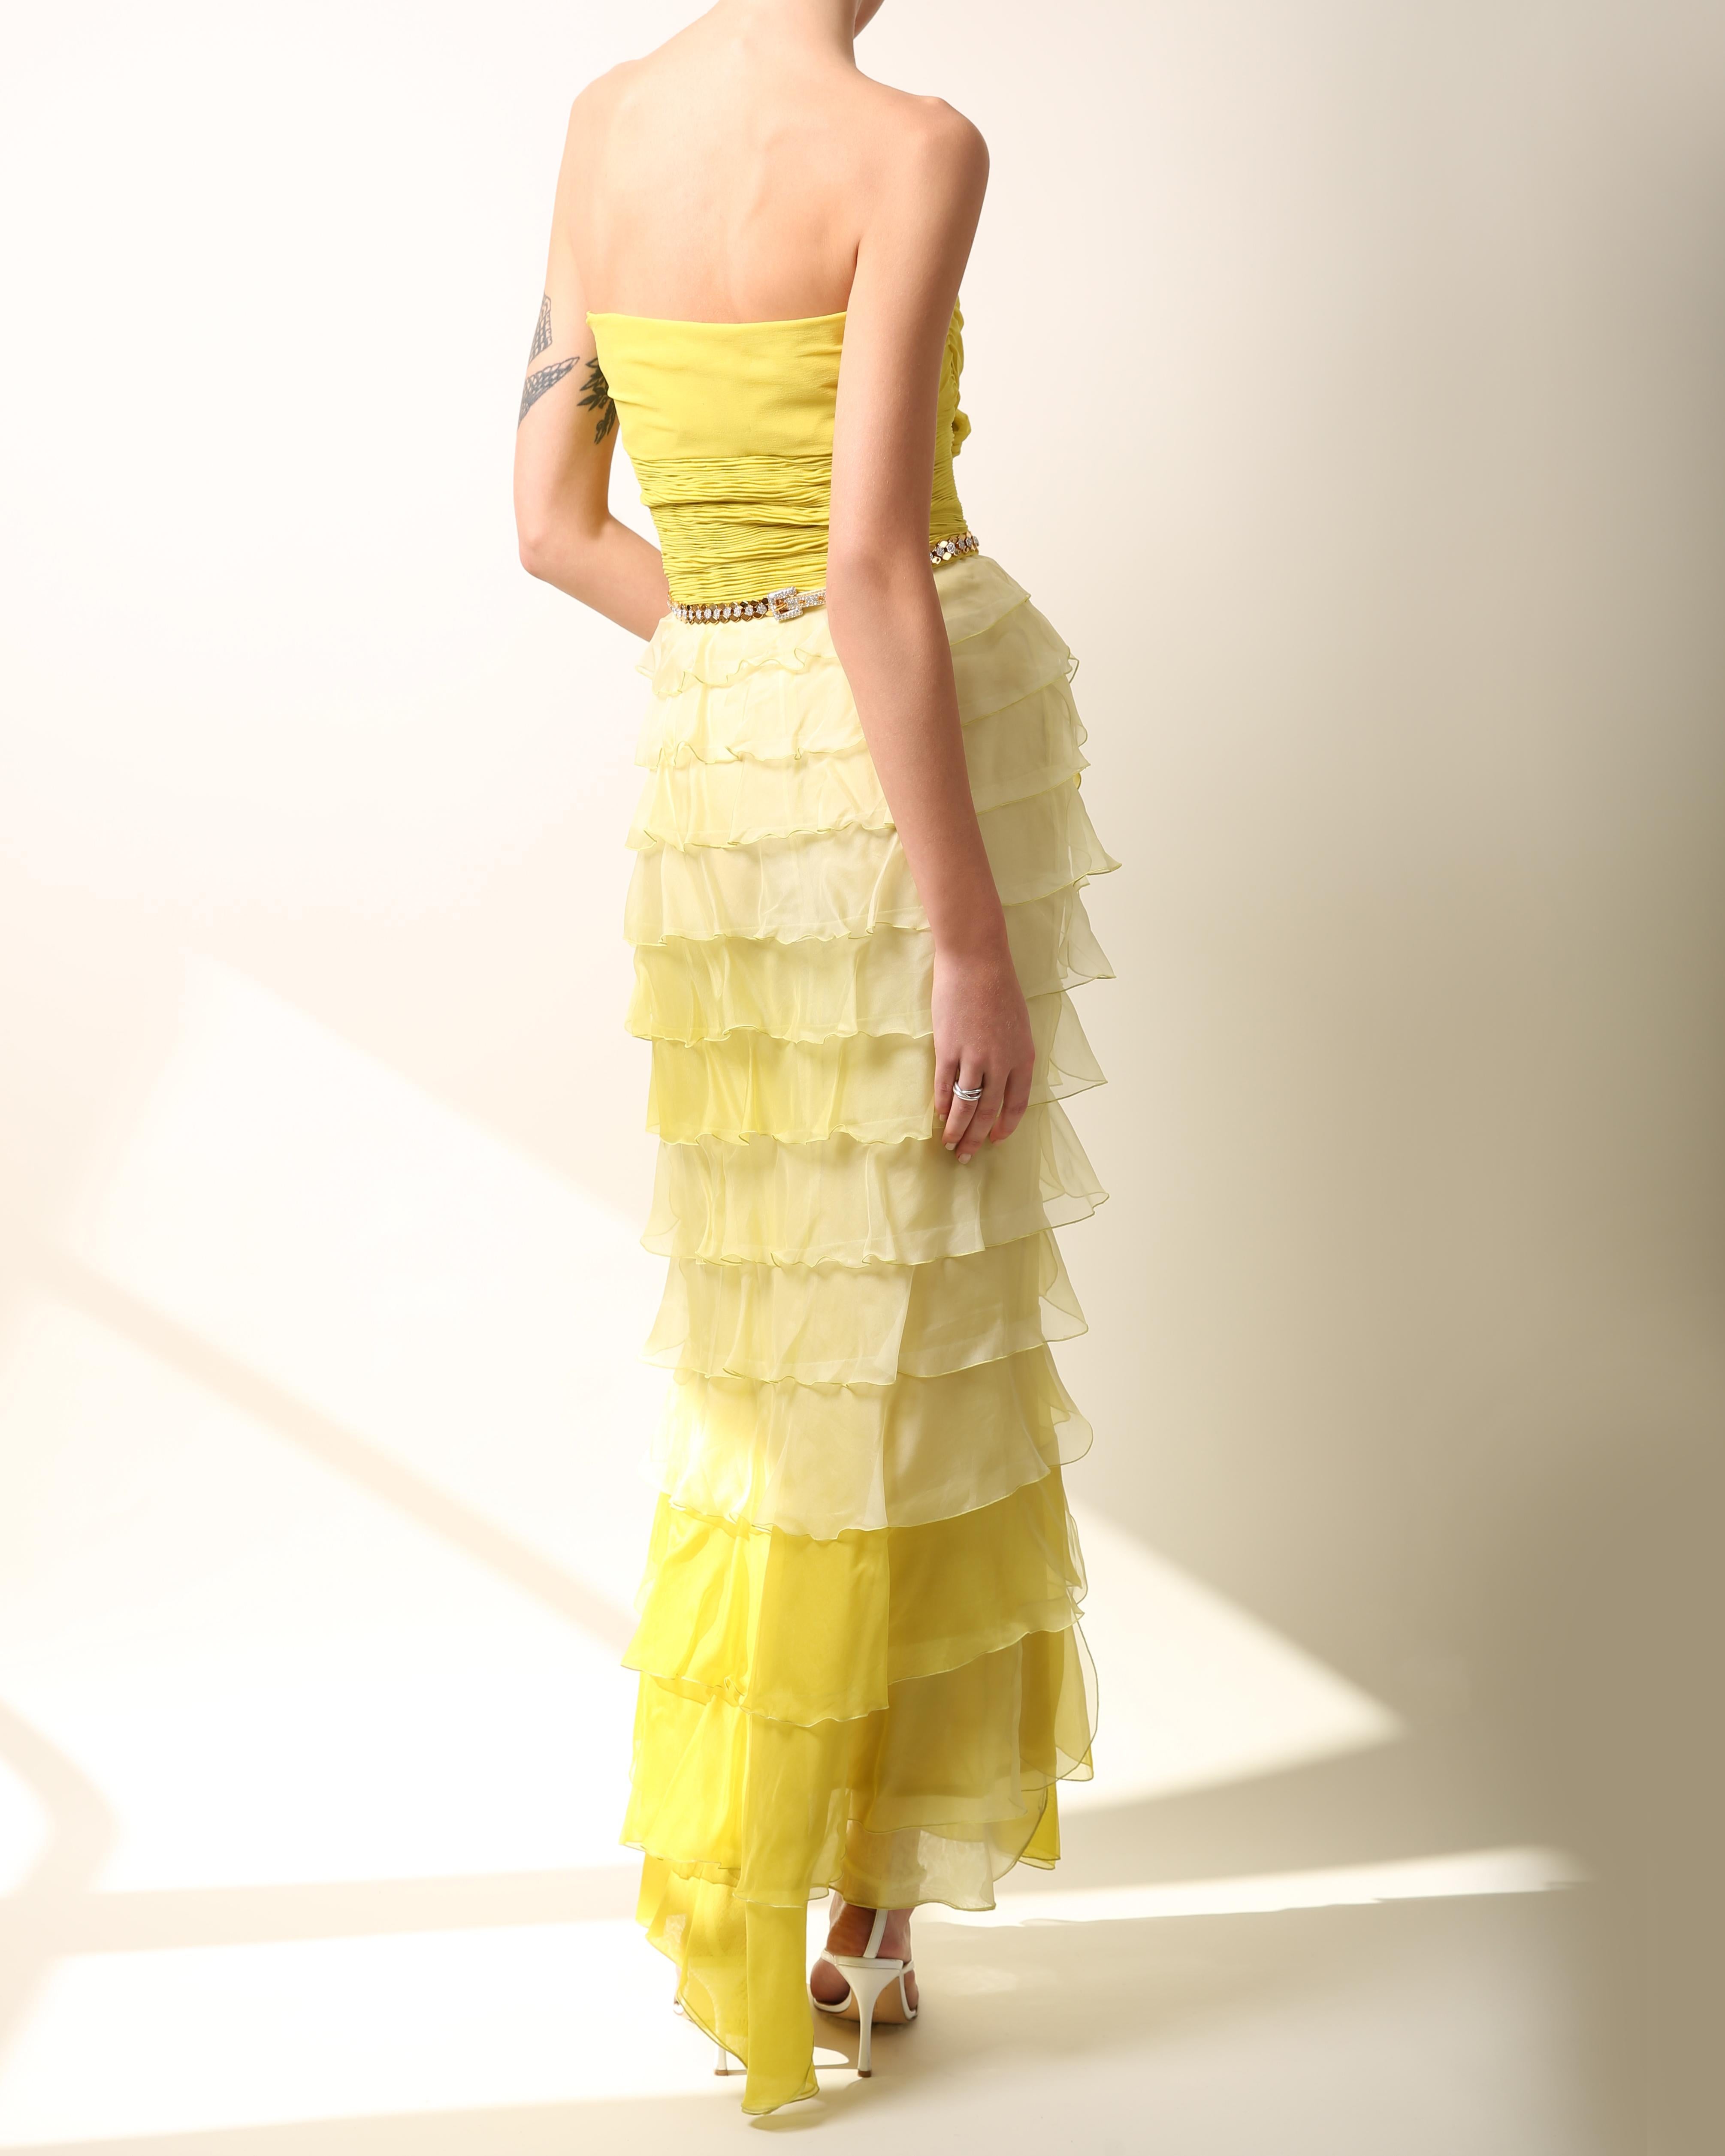 Valentino S/S 2005 yellow chartreuse strapless ruffle bustier silk gown dress 3